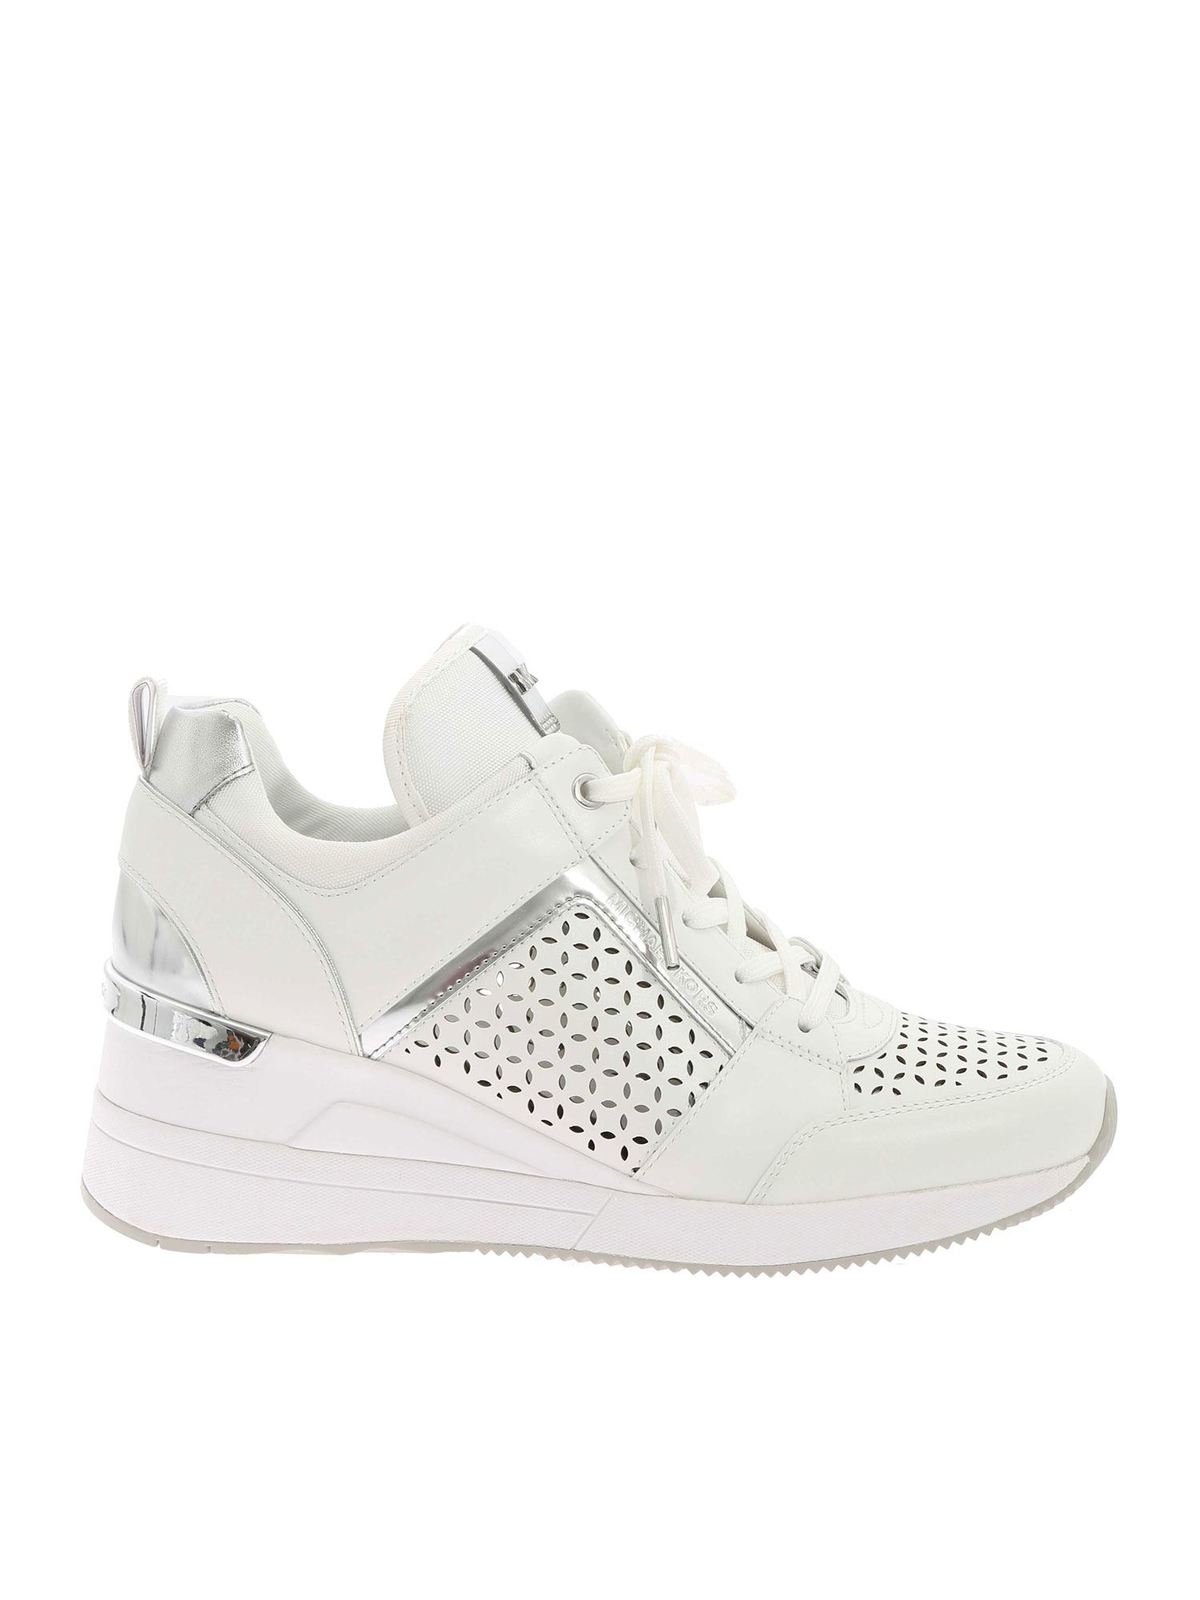 Trainers Michael Kors - Georgie sneakers in white and silver color -  43R1GEFS3L085